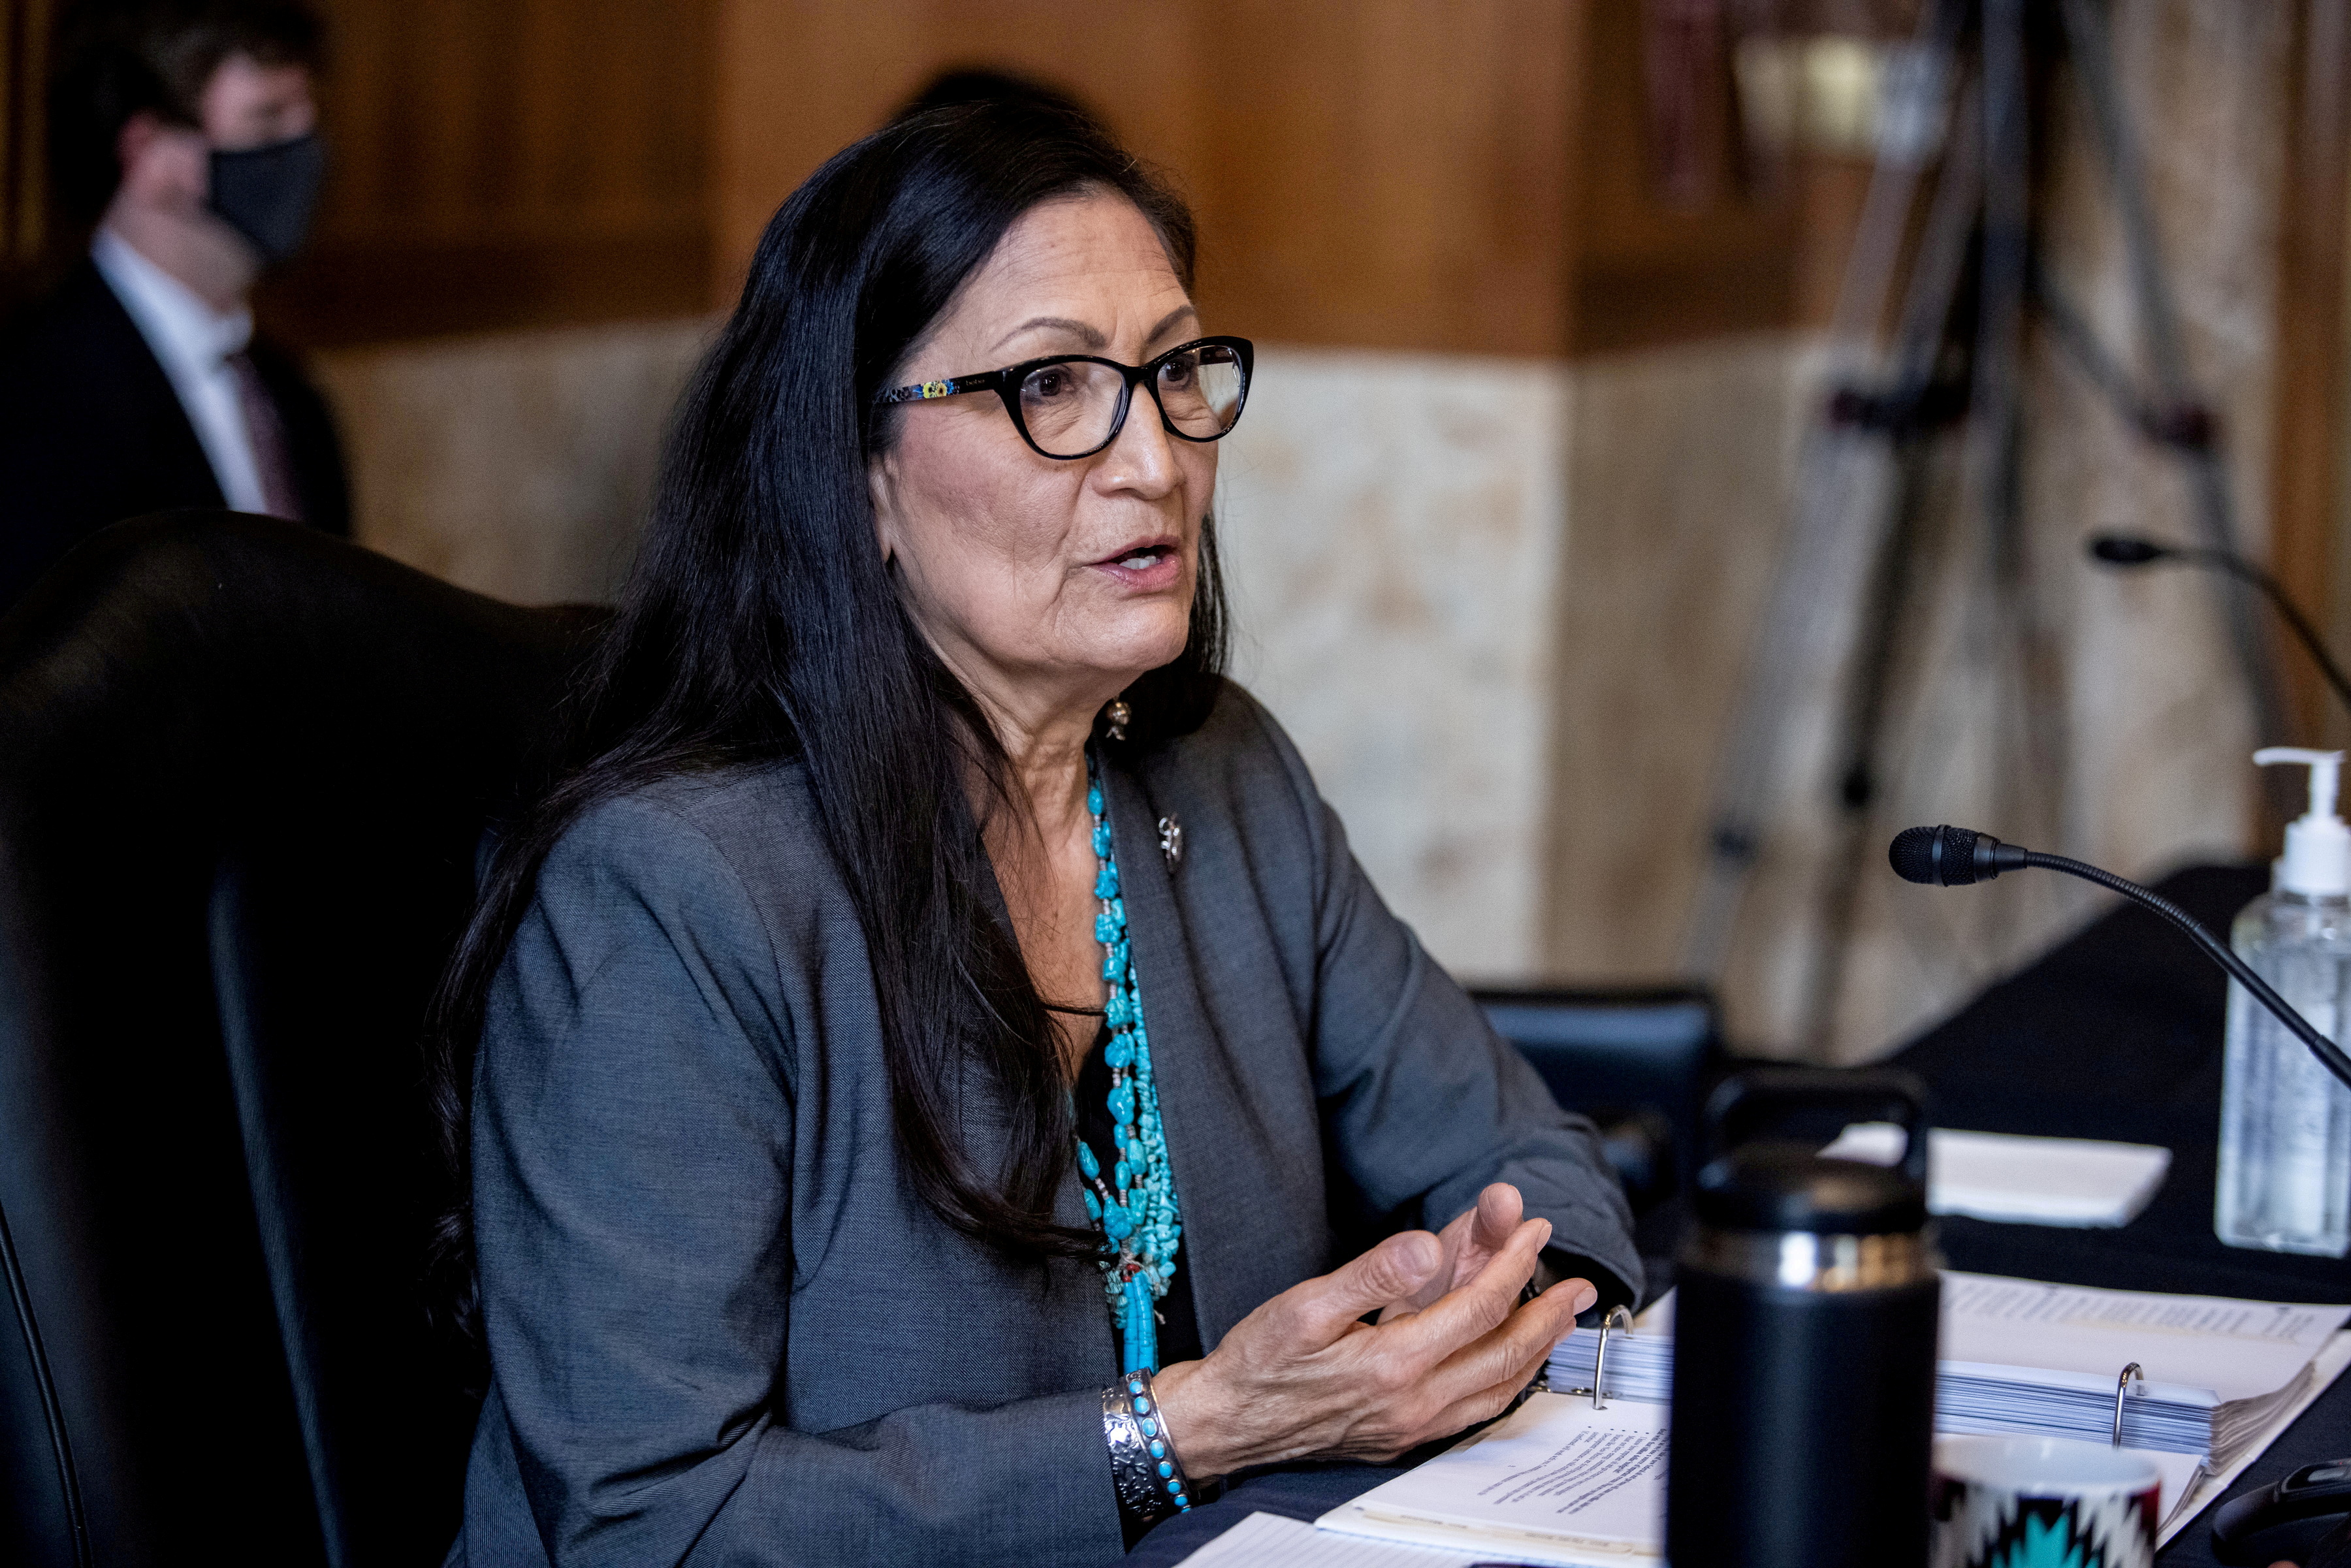 U.S. Rep. Deb Haaland speaks during a Senate Committee on Energy and Natural Resources hearing on her nomination to be Interior Secretary on Capitol Hill in Washington, DC, U.S. February 23, 2021. Graeme Jennings/Pool via REUTERS